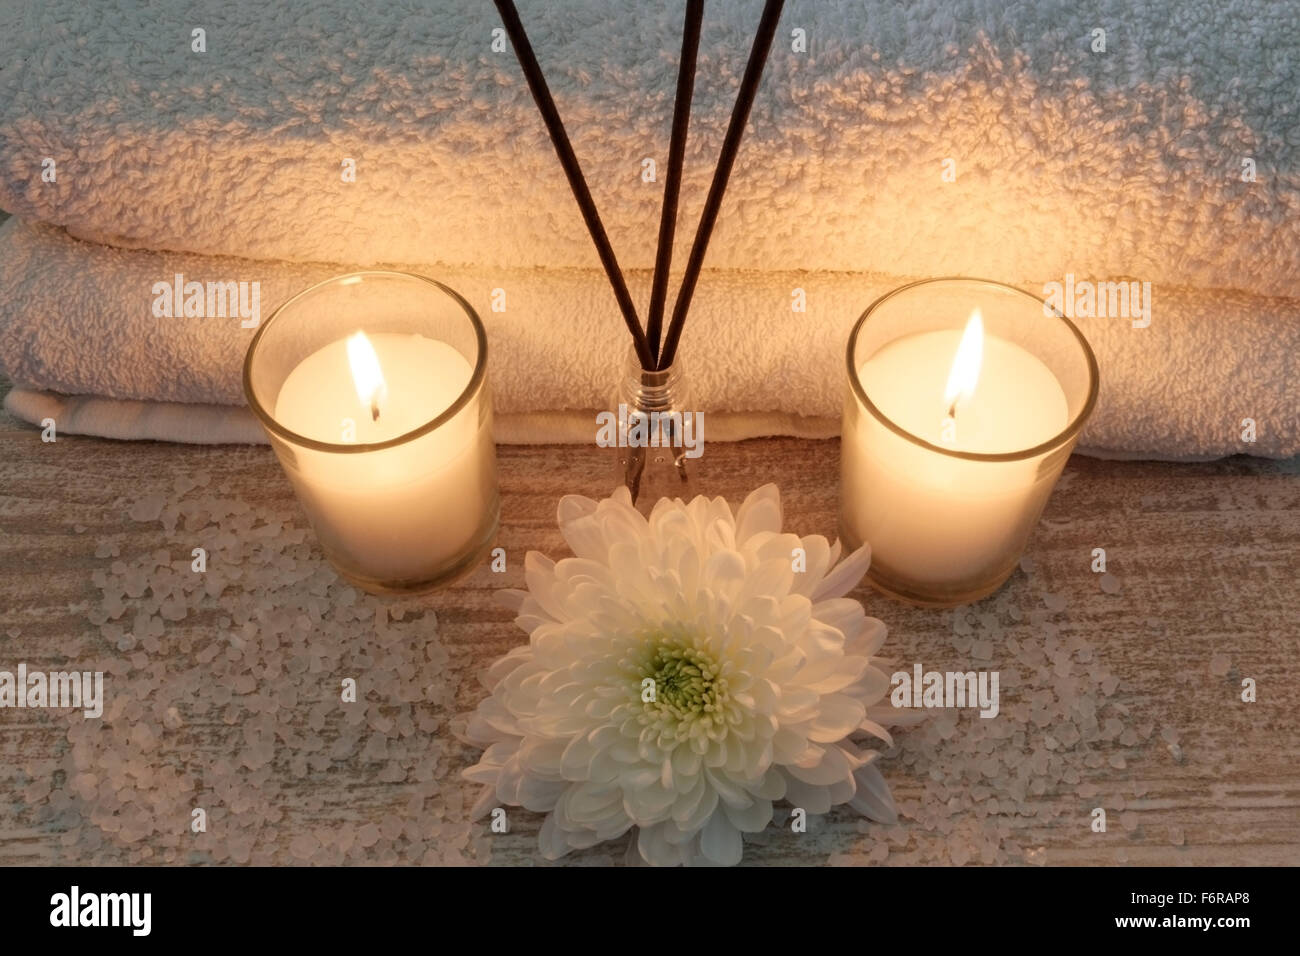 Spa composition with white towels, candles, flowers, incense sticks and bath salt on wooden table Stock Photo